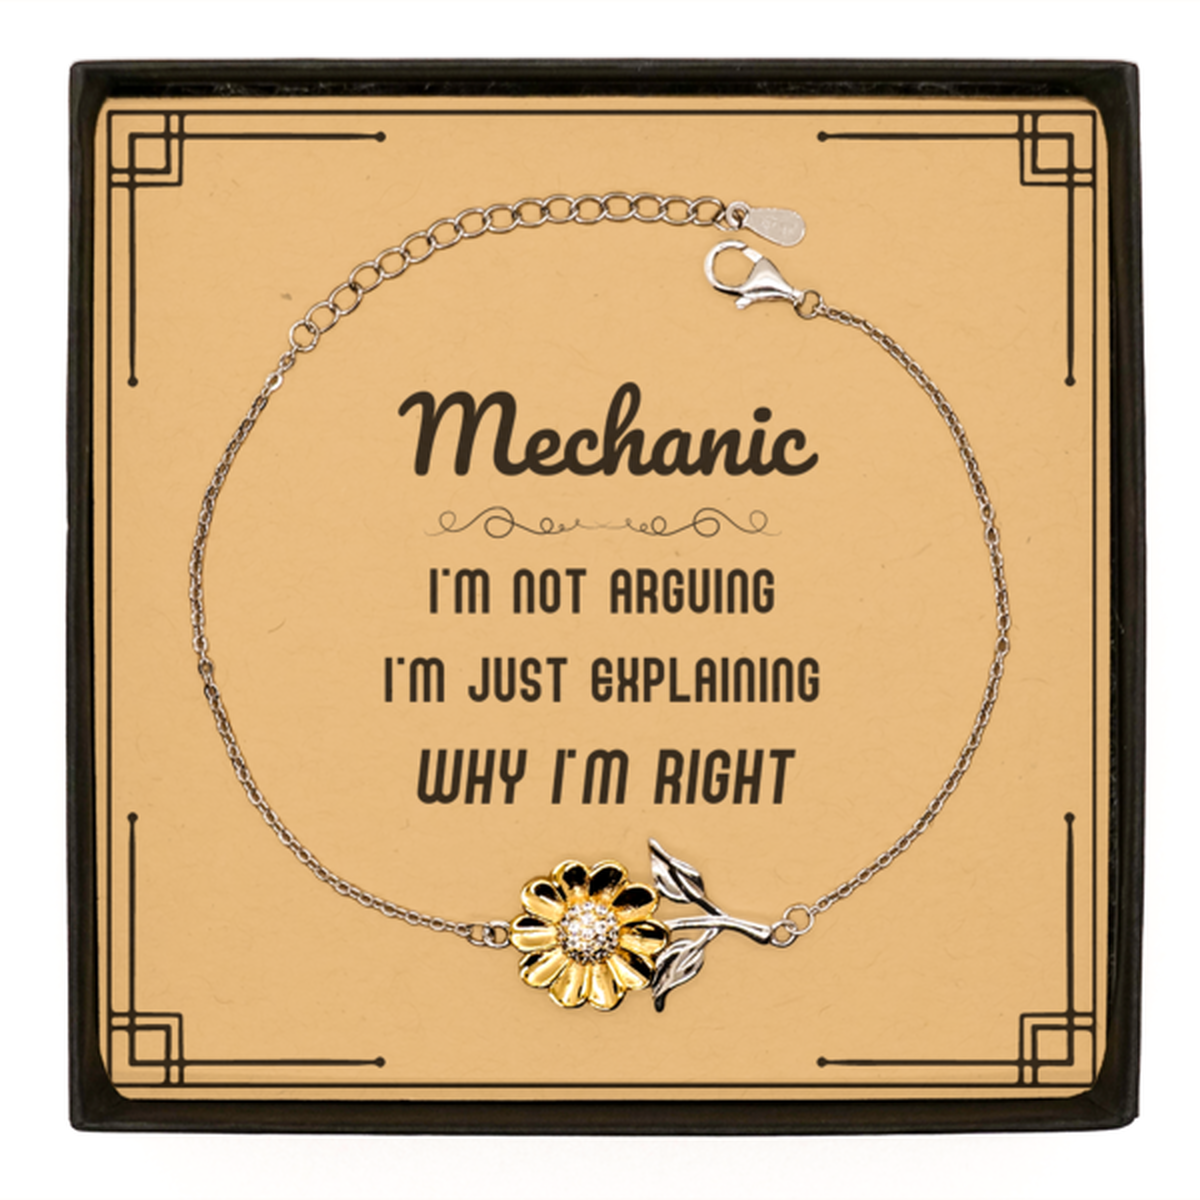 Mechanic I'm not Arguing. I'm Just Explaining Why I'm RIGHT Sunflower Bracelet, Funny Saying Quote Mechanic Gifts For Mechanic Message Card Graduation Birthday Christmas Gifts for Men Women Coworker